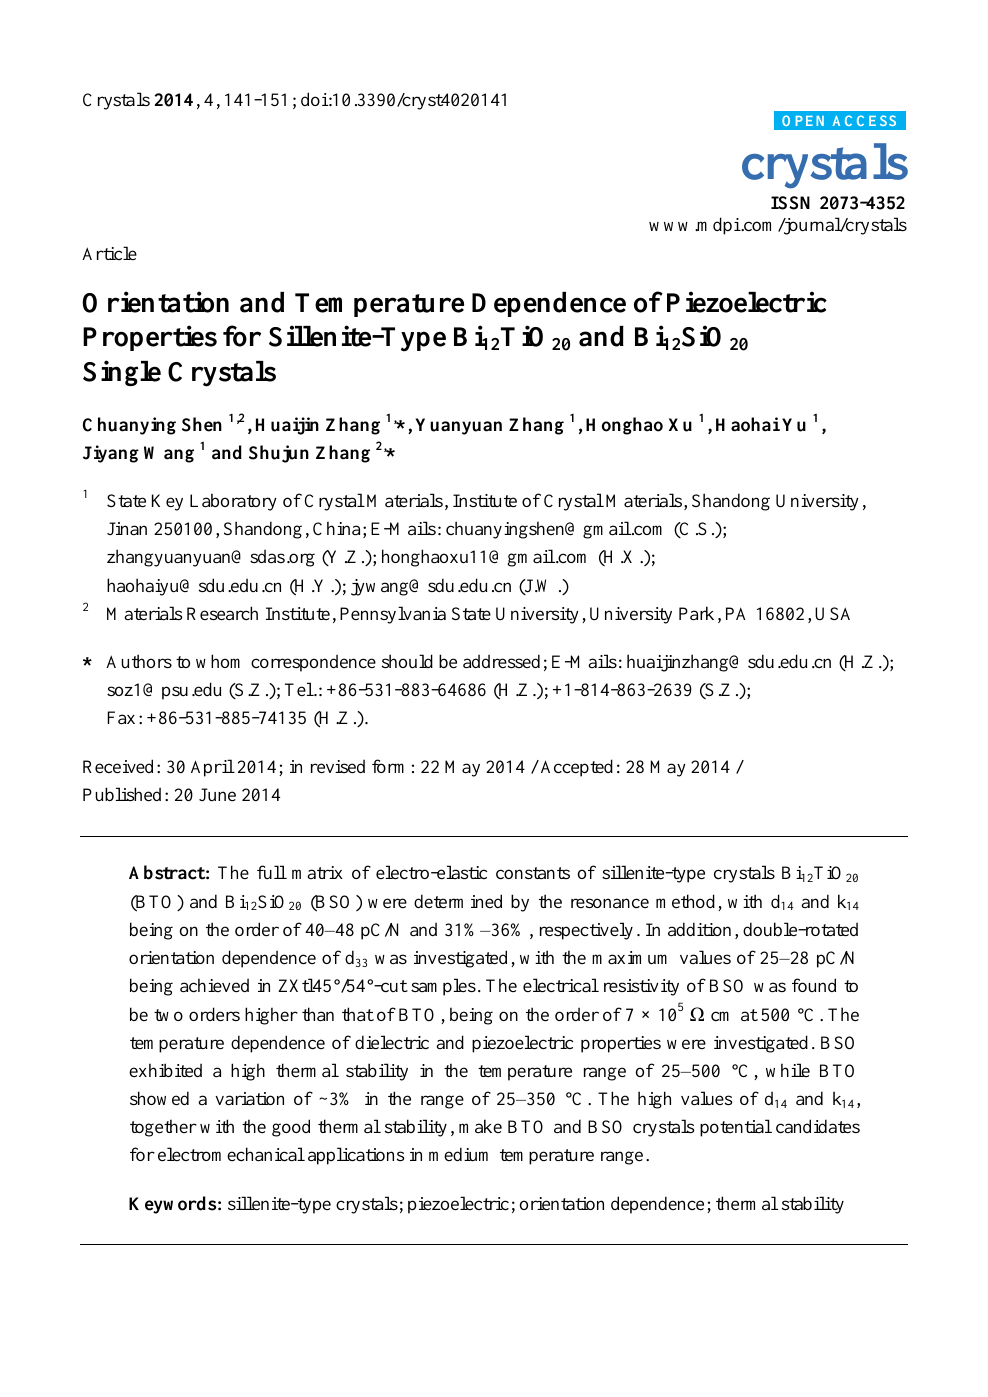 Orientation And Temperature Dependence Of Piezoelectric Properties For Sillenite Type Bi12tio And Bi12sio Single Crystals Topic Of Research Paper In Nano Technology Download Scholarly Article Pdf And Read For Free On Cyberleninka Open